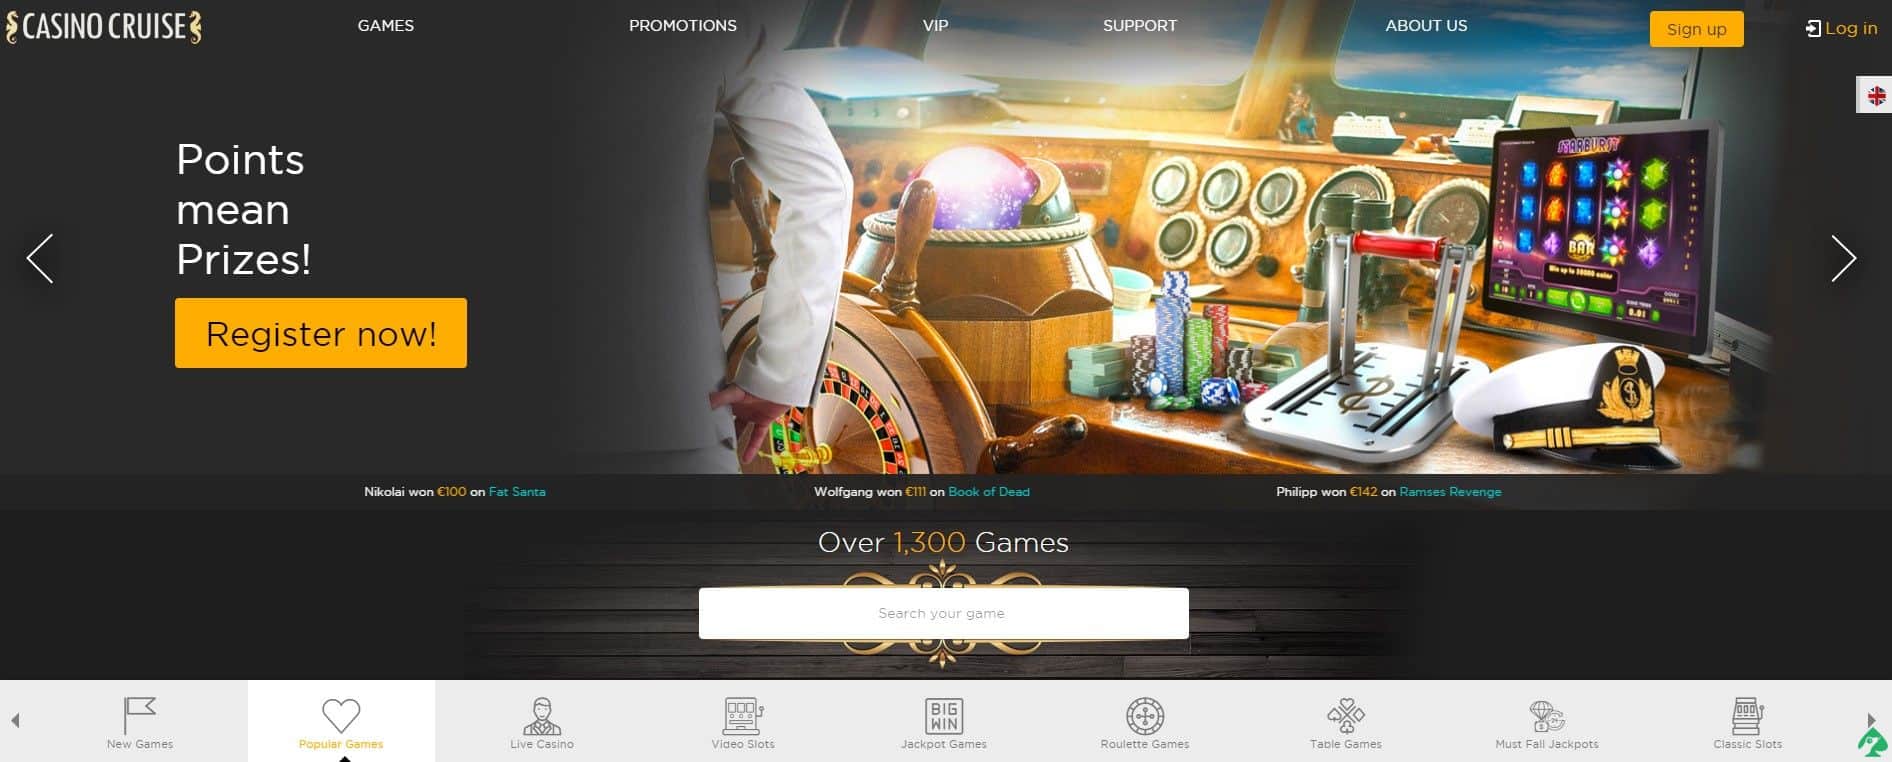 casino cruise free spins code for UK players